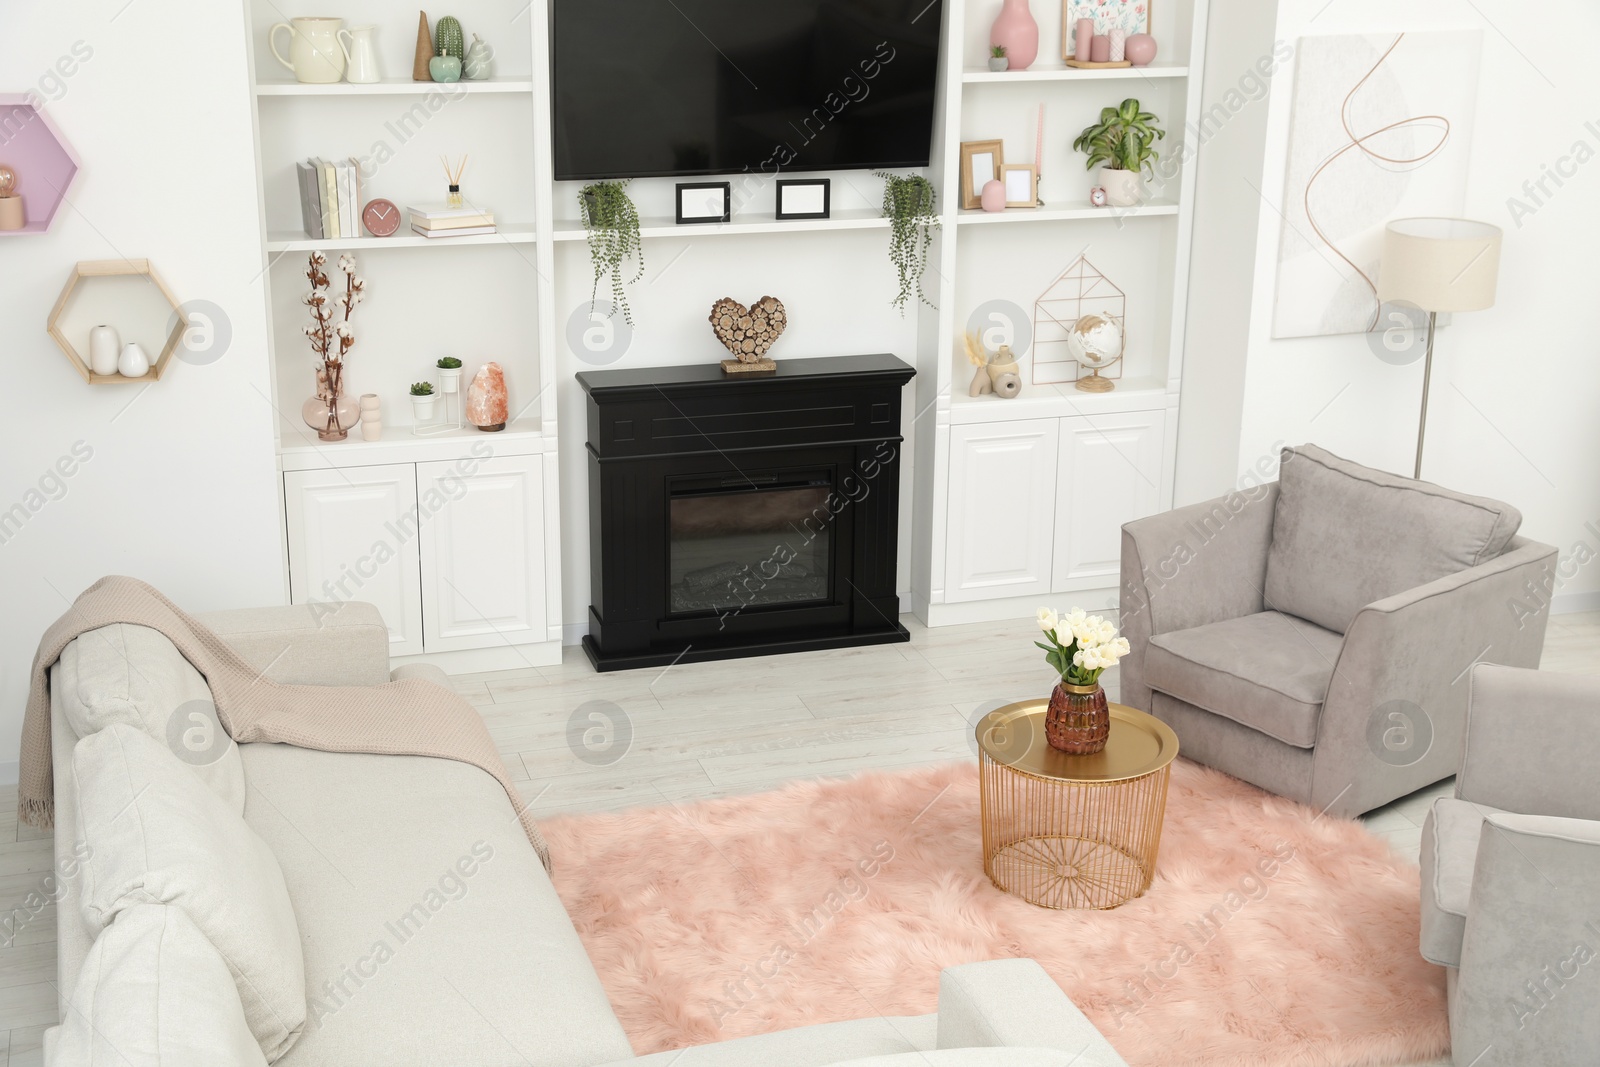 Photo of Stylish room interior with beautiful fireplace, armchairs, sofa and shelves with decor